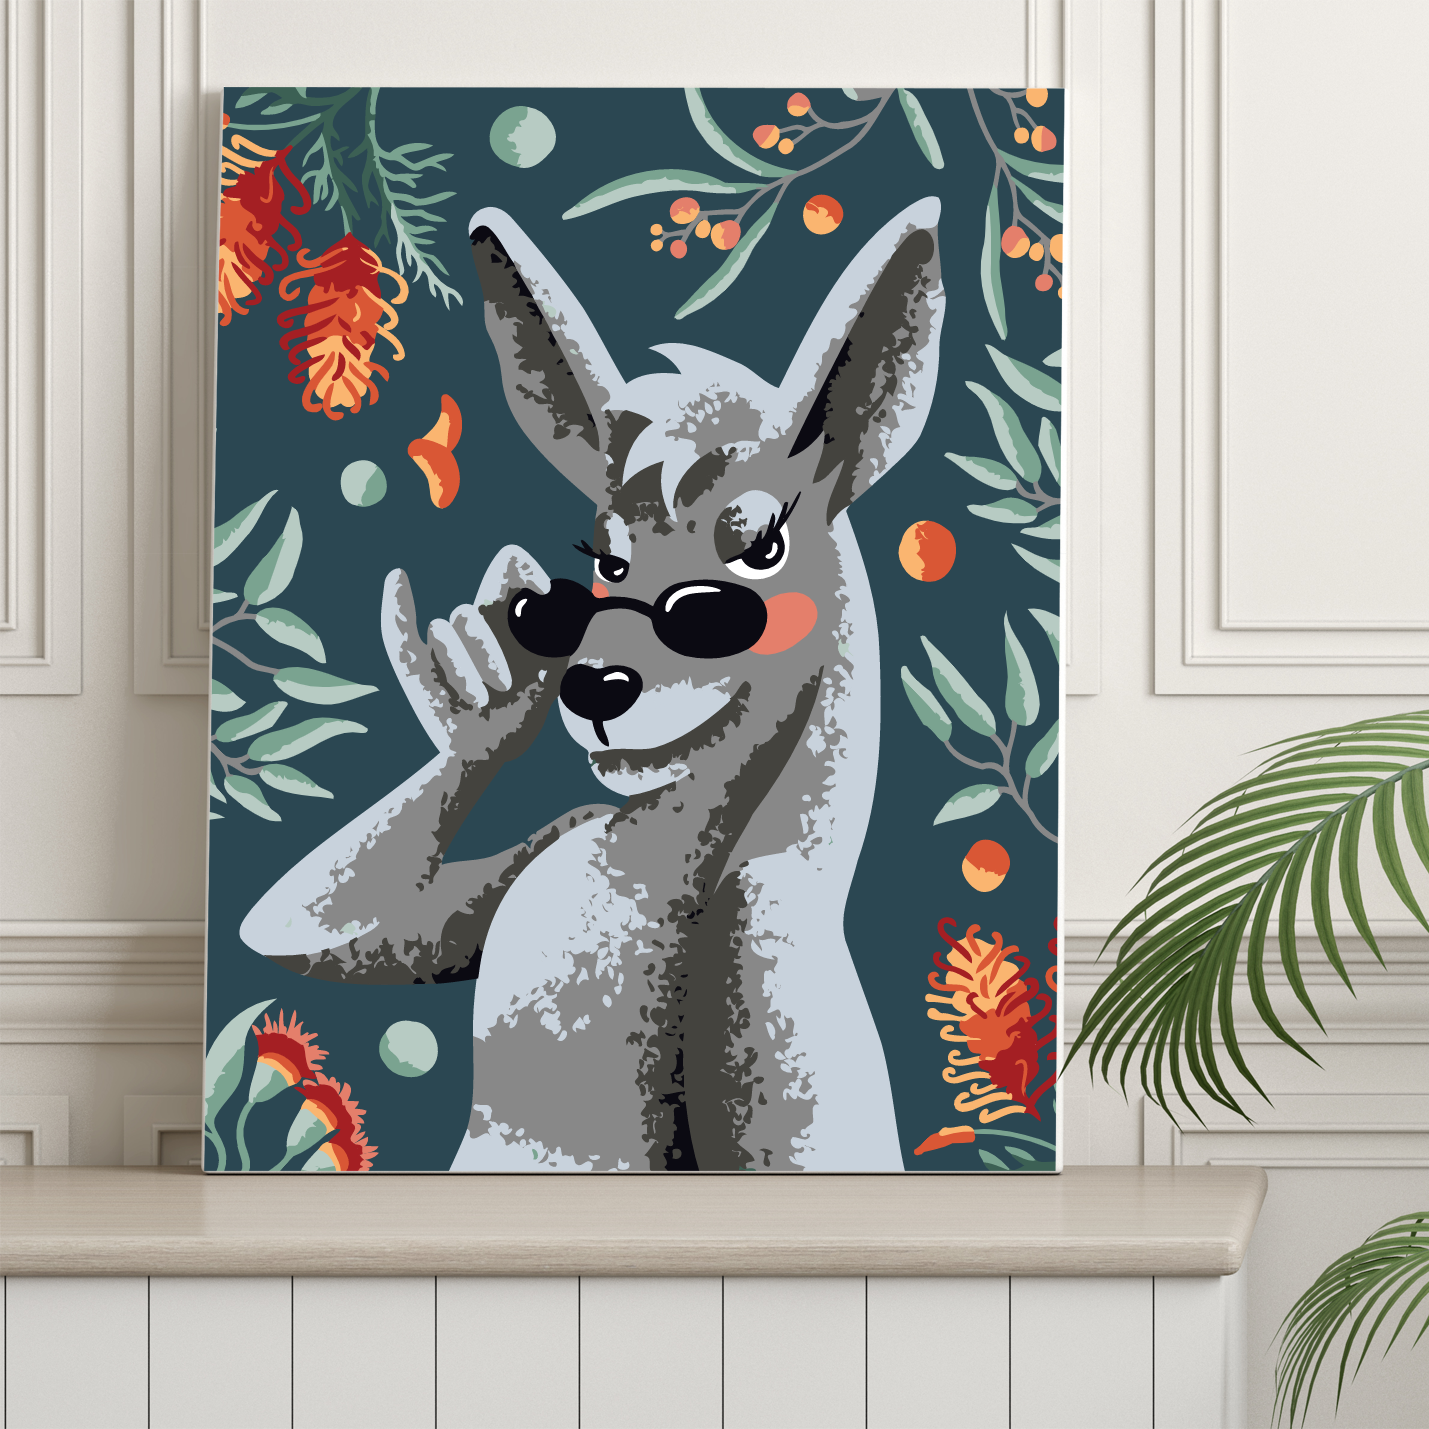 40x50cm Paint by Numbers Kit: Cool Kangaroo with Glasses